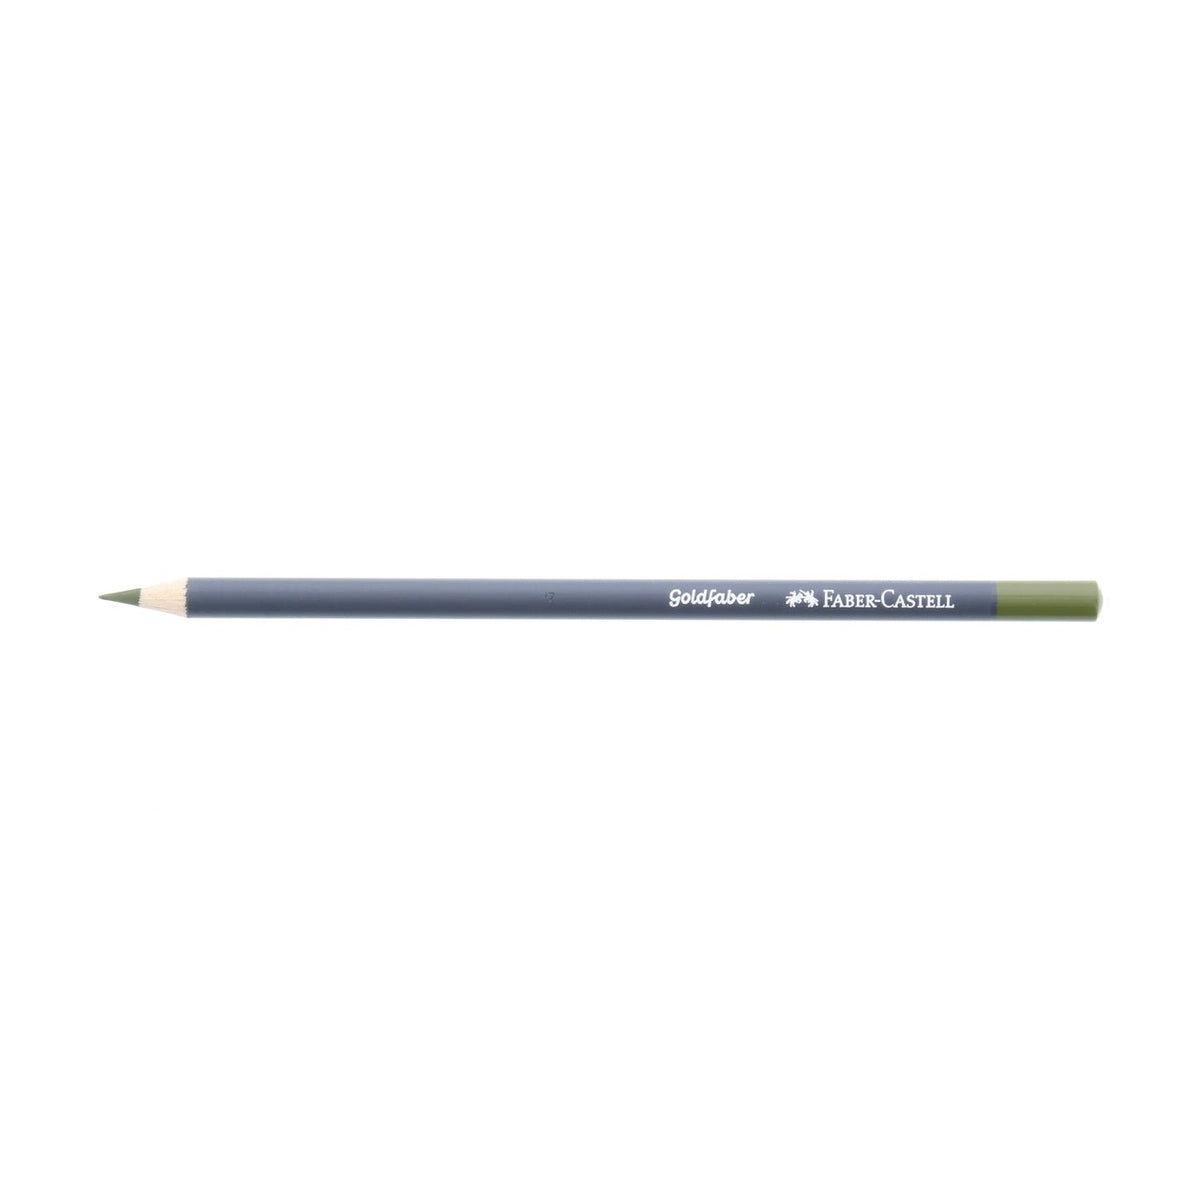 Goldfaber Colored Pencil 173 Olive Green Yellowish - merriartist.com